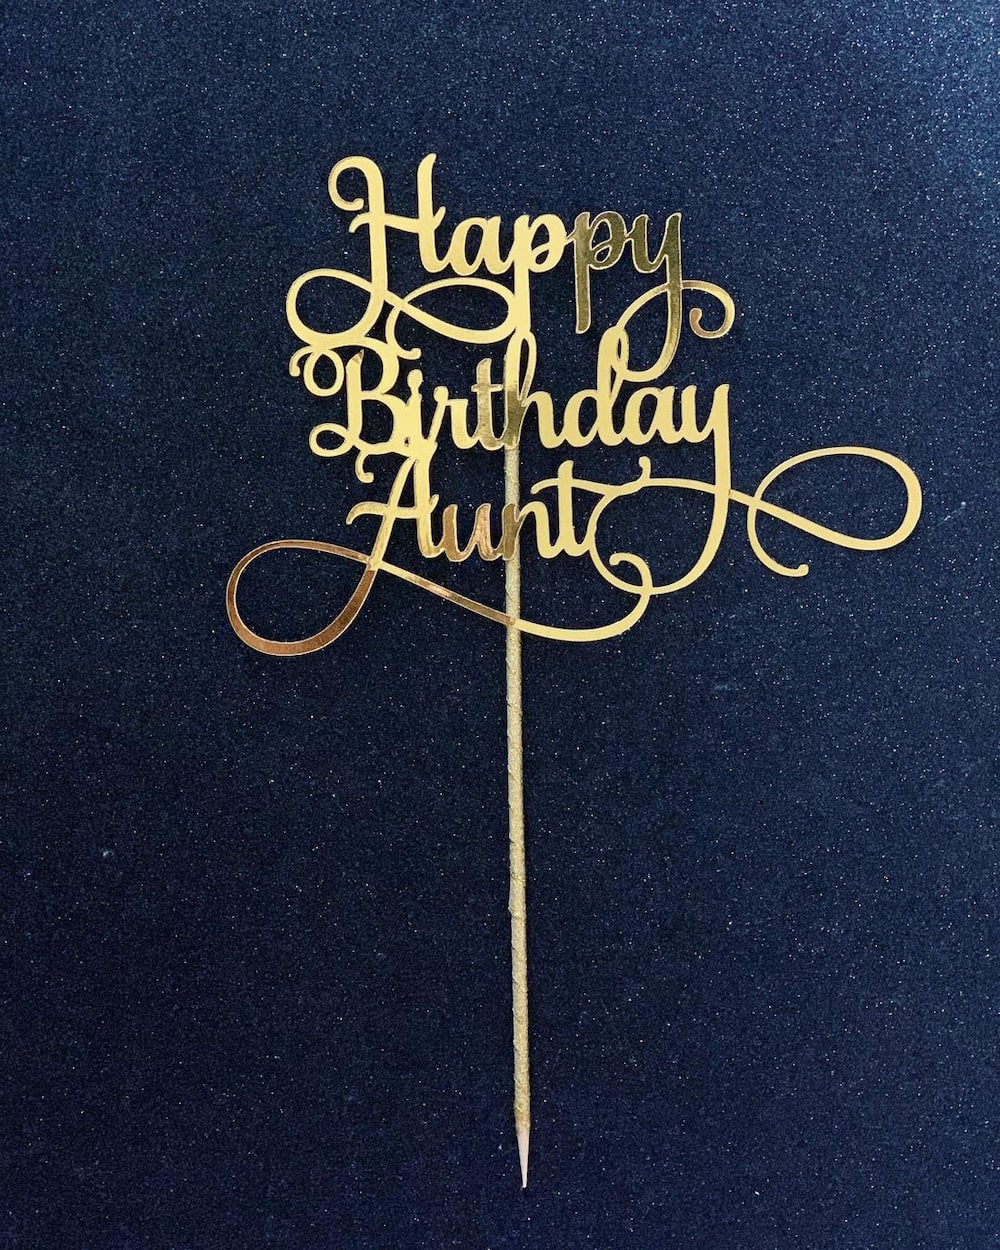 100+ special happy birthday aunty messages